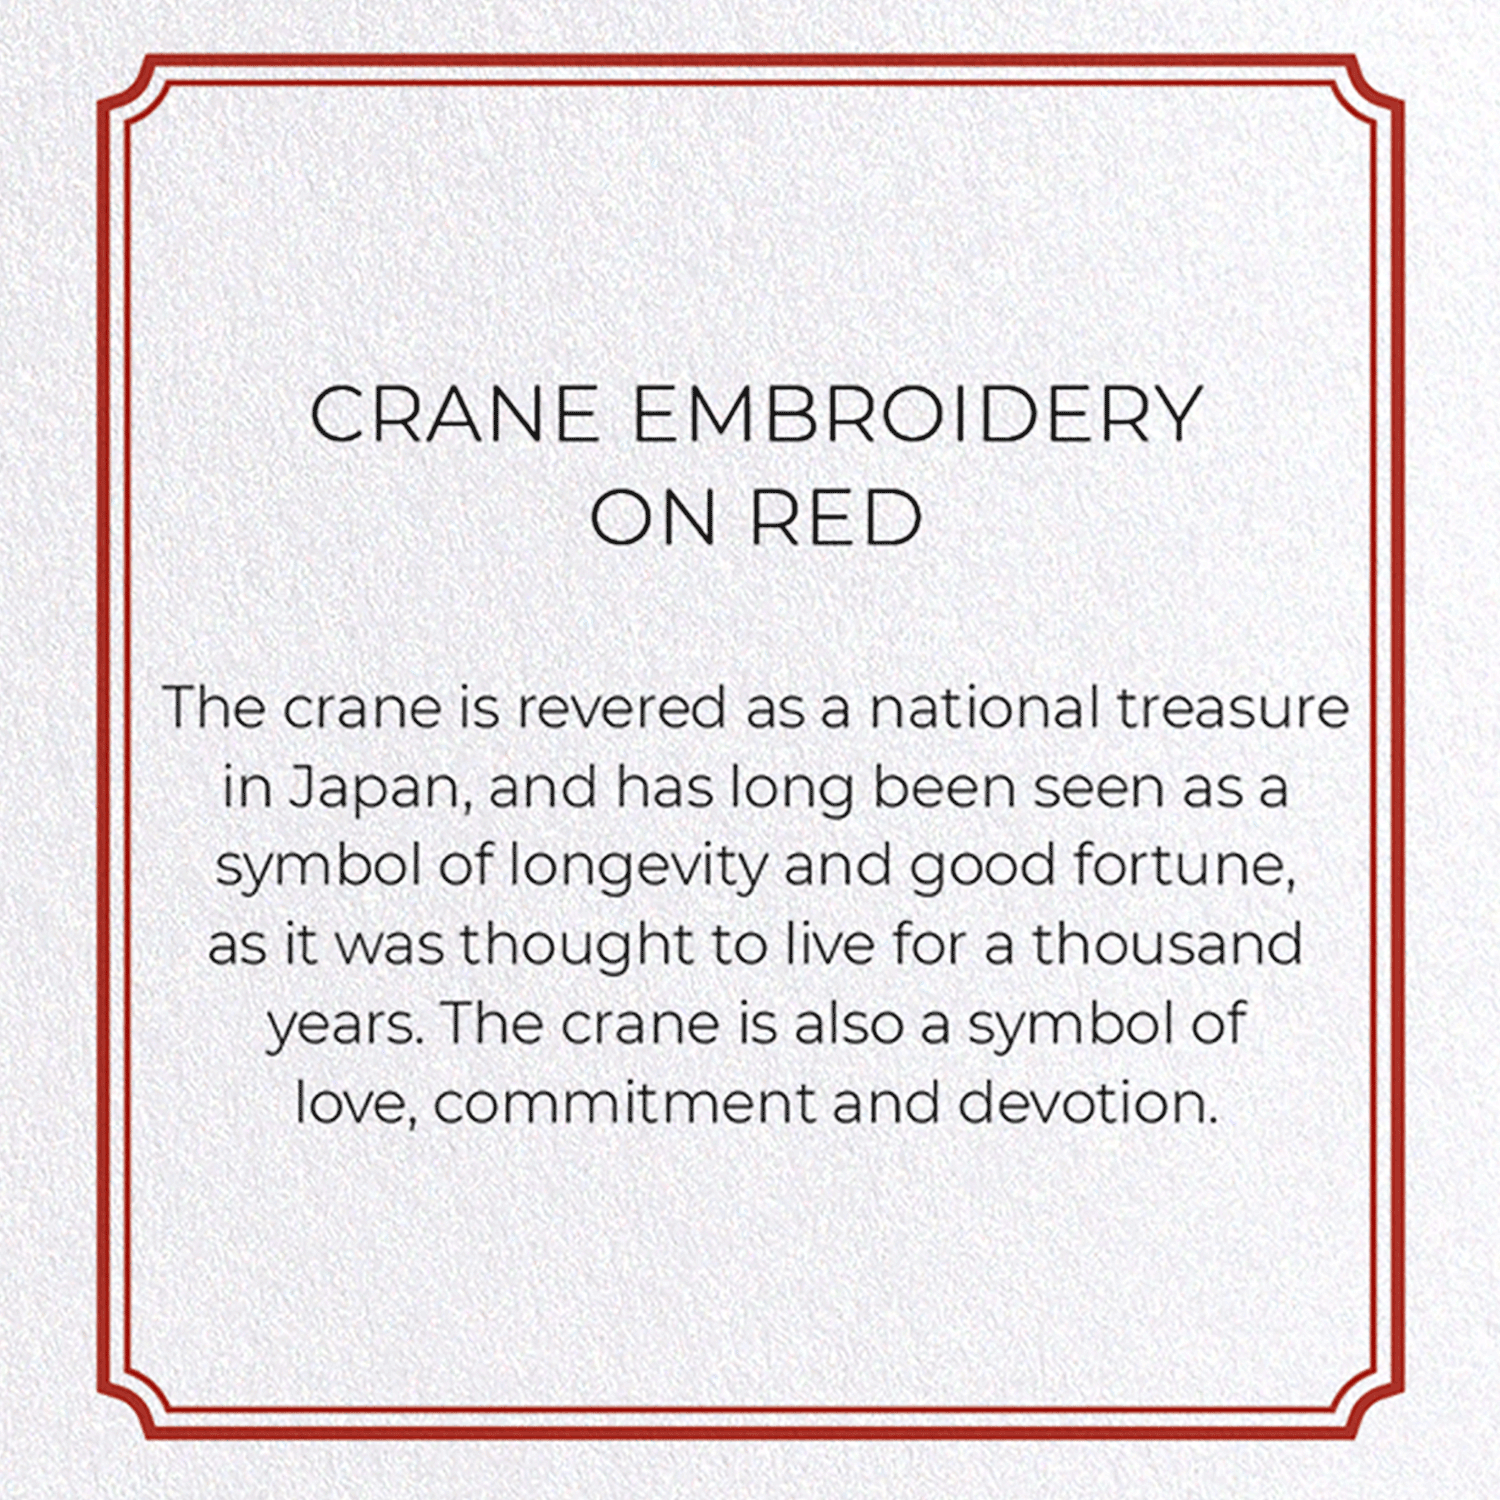 CRANE EMBROIDERY ON RED